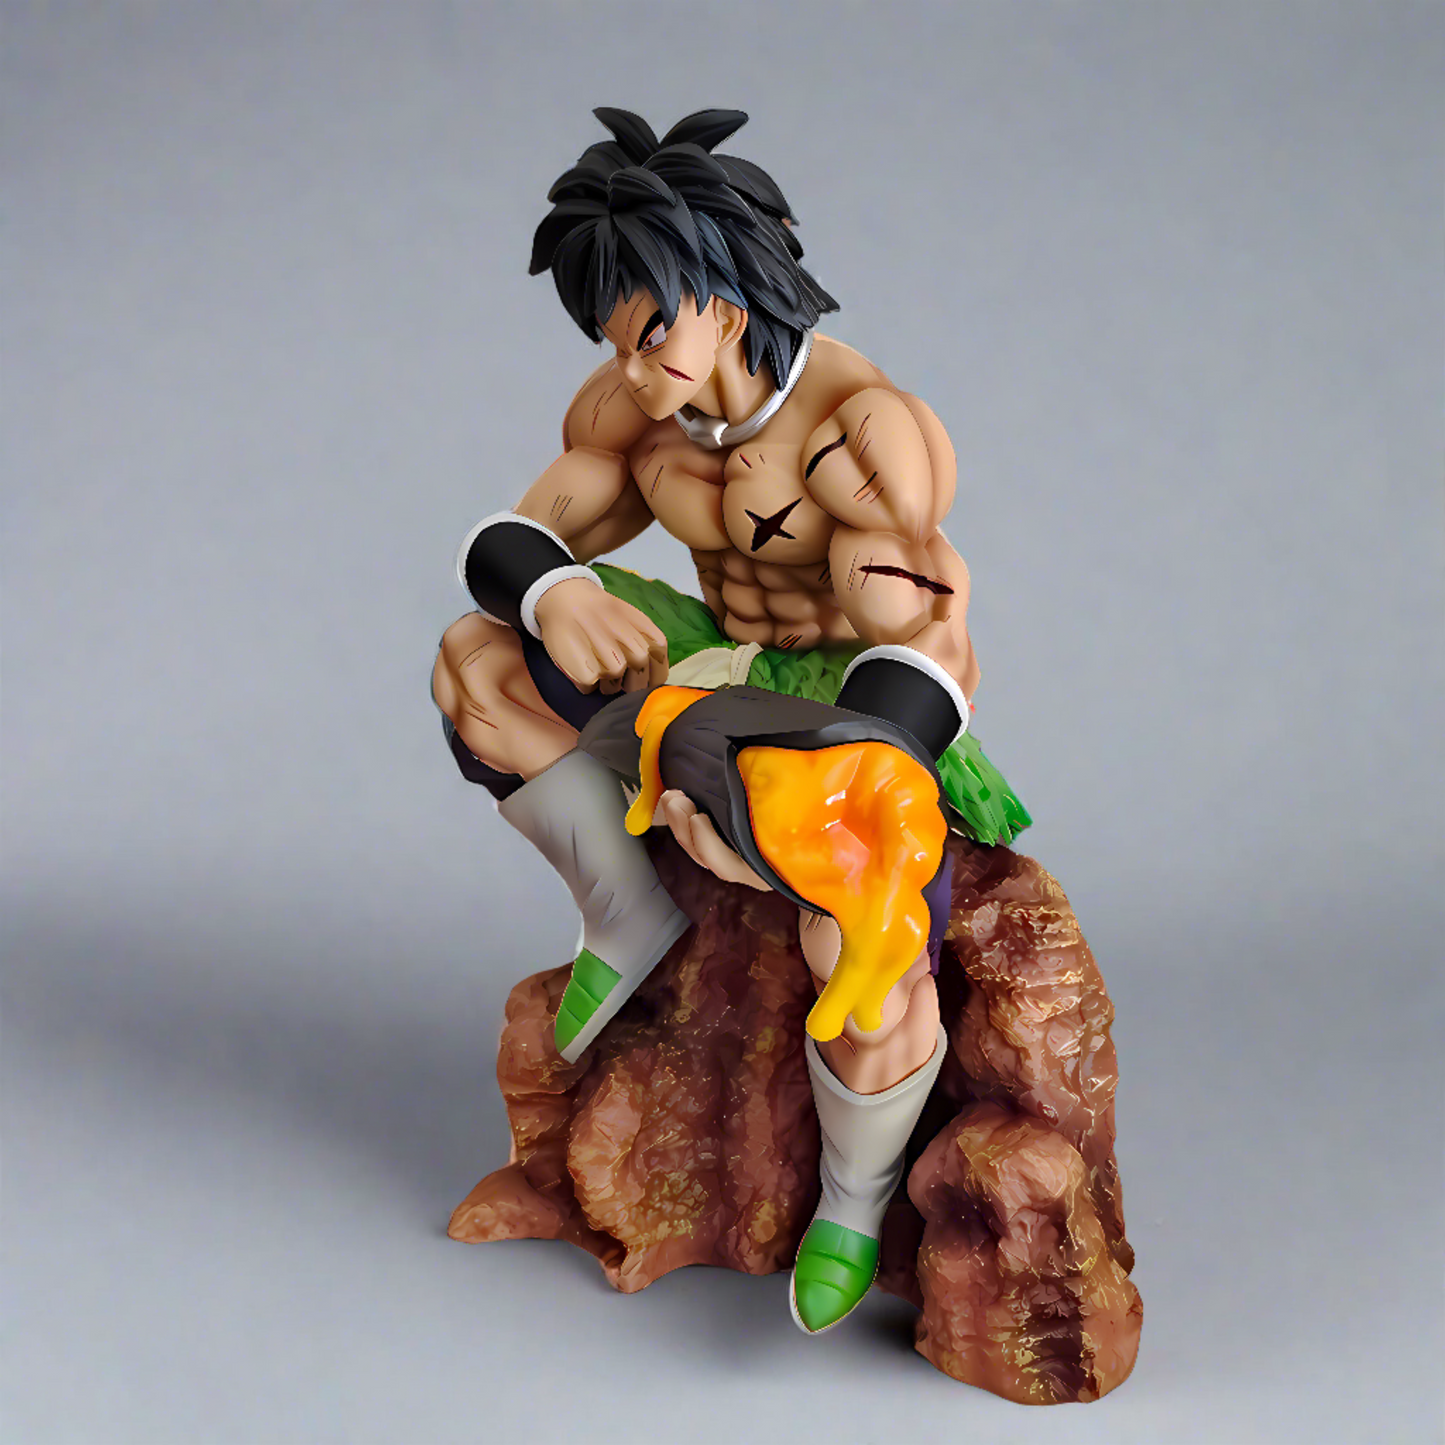 Broly Dragon Ball action figure with intense gaze, seated on a rock and holding a molten lava book, against a dynamic background of embers and flames.